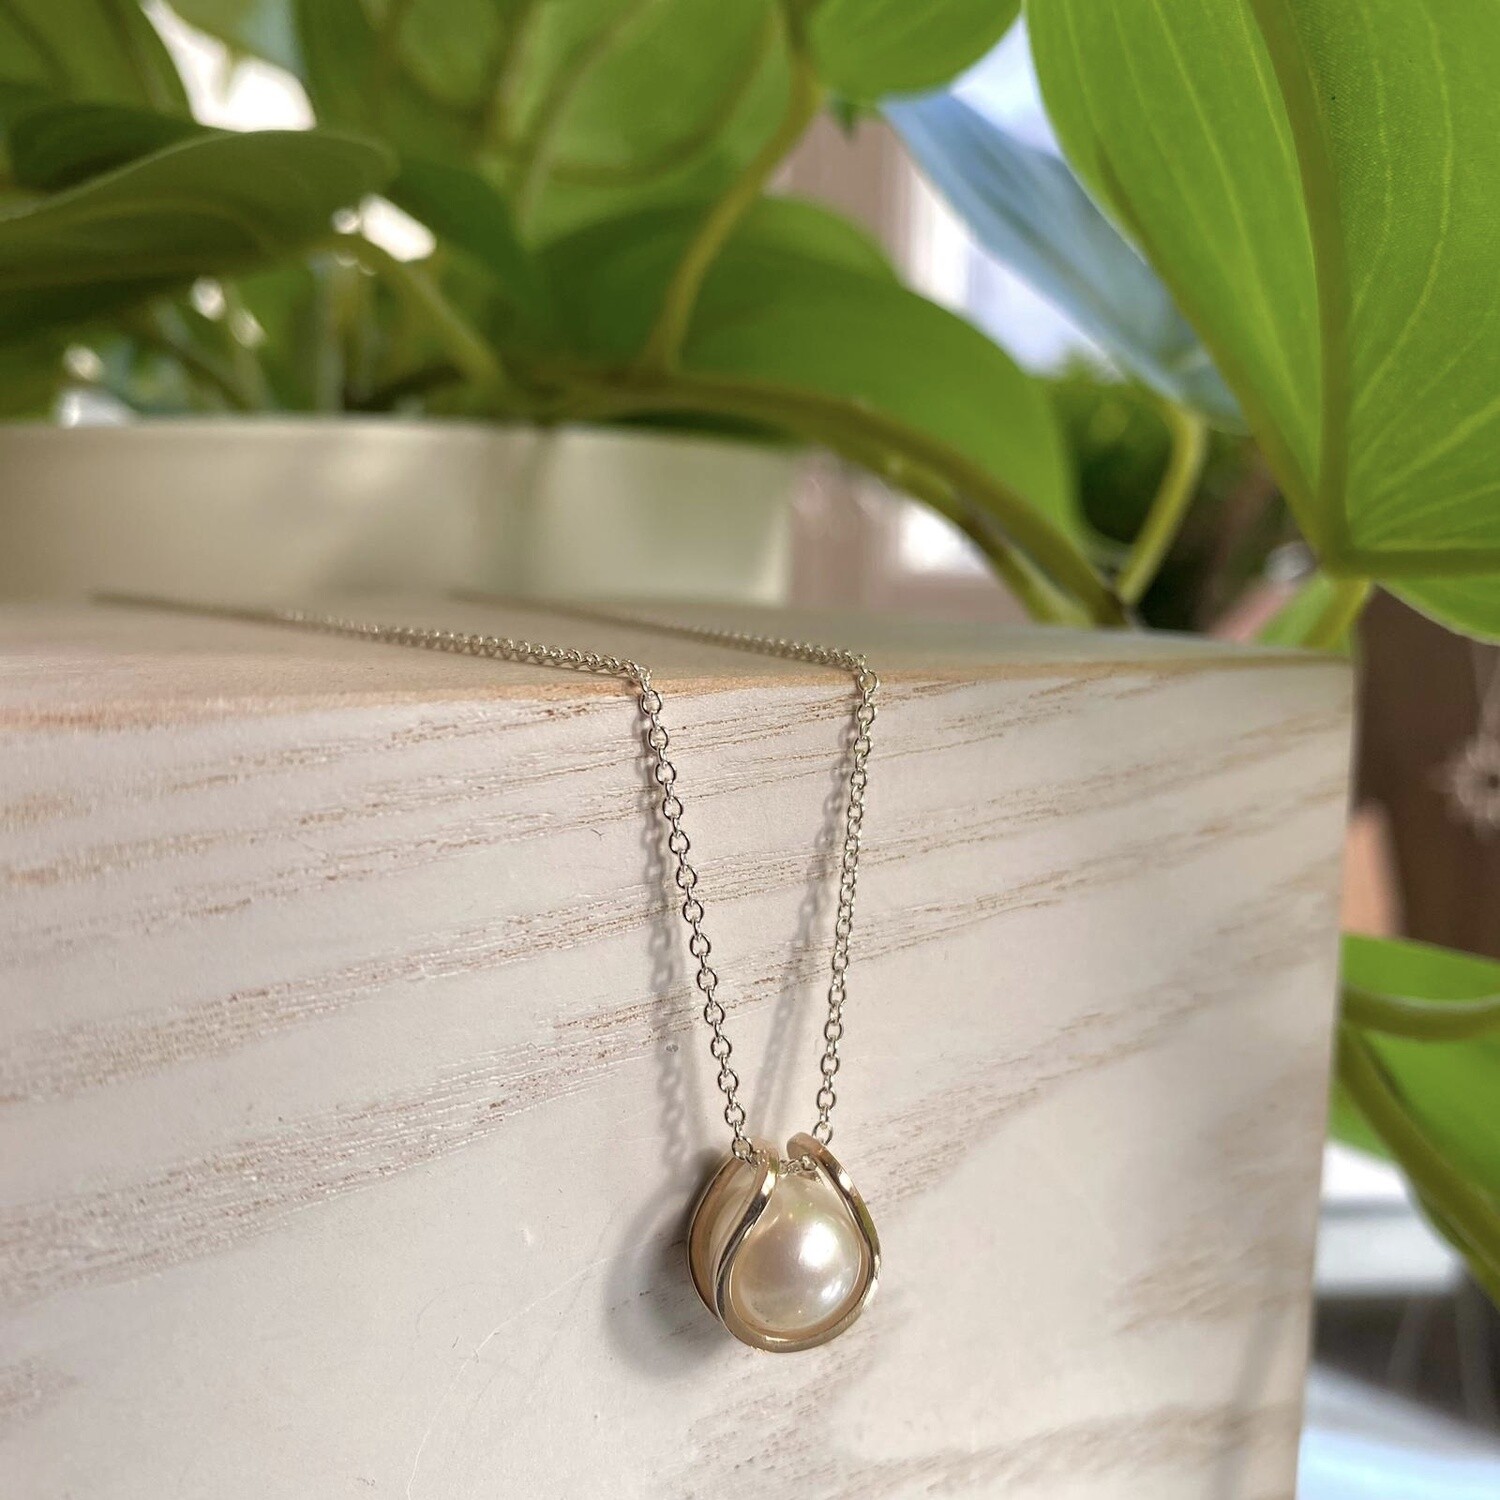 Sling-shot pearl pendant in gold and silver